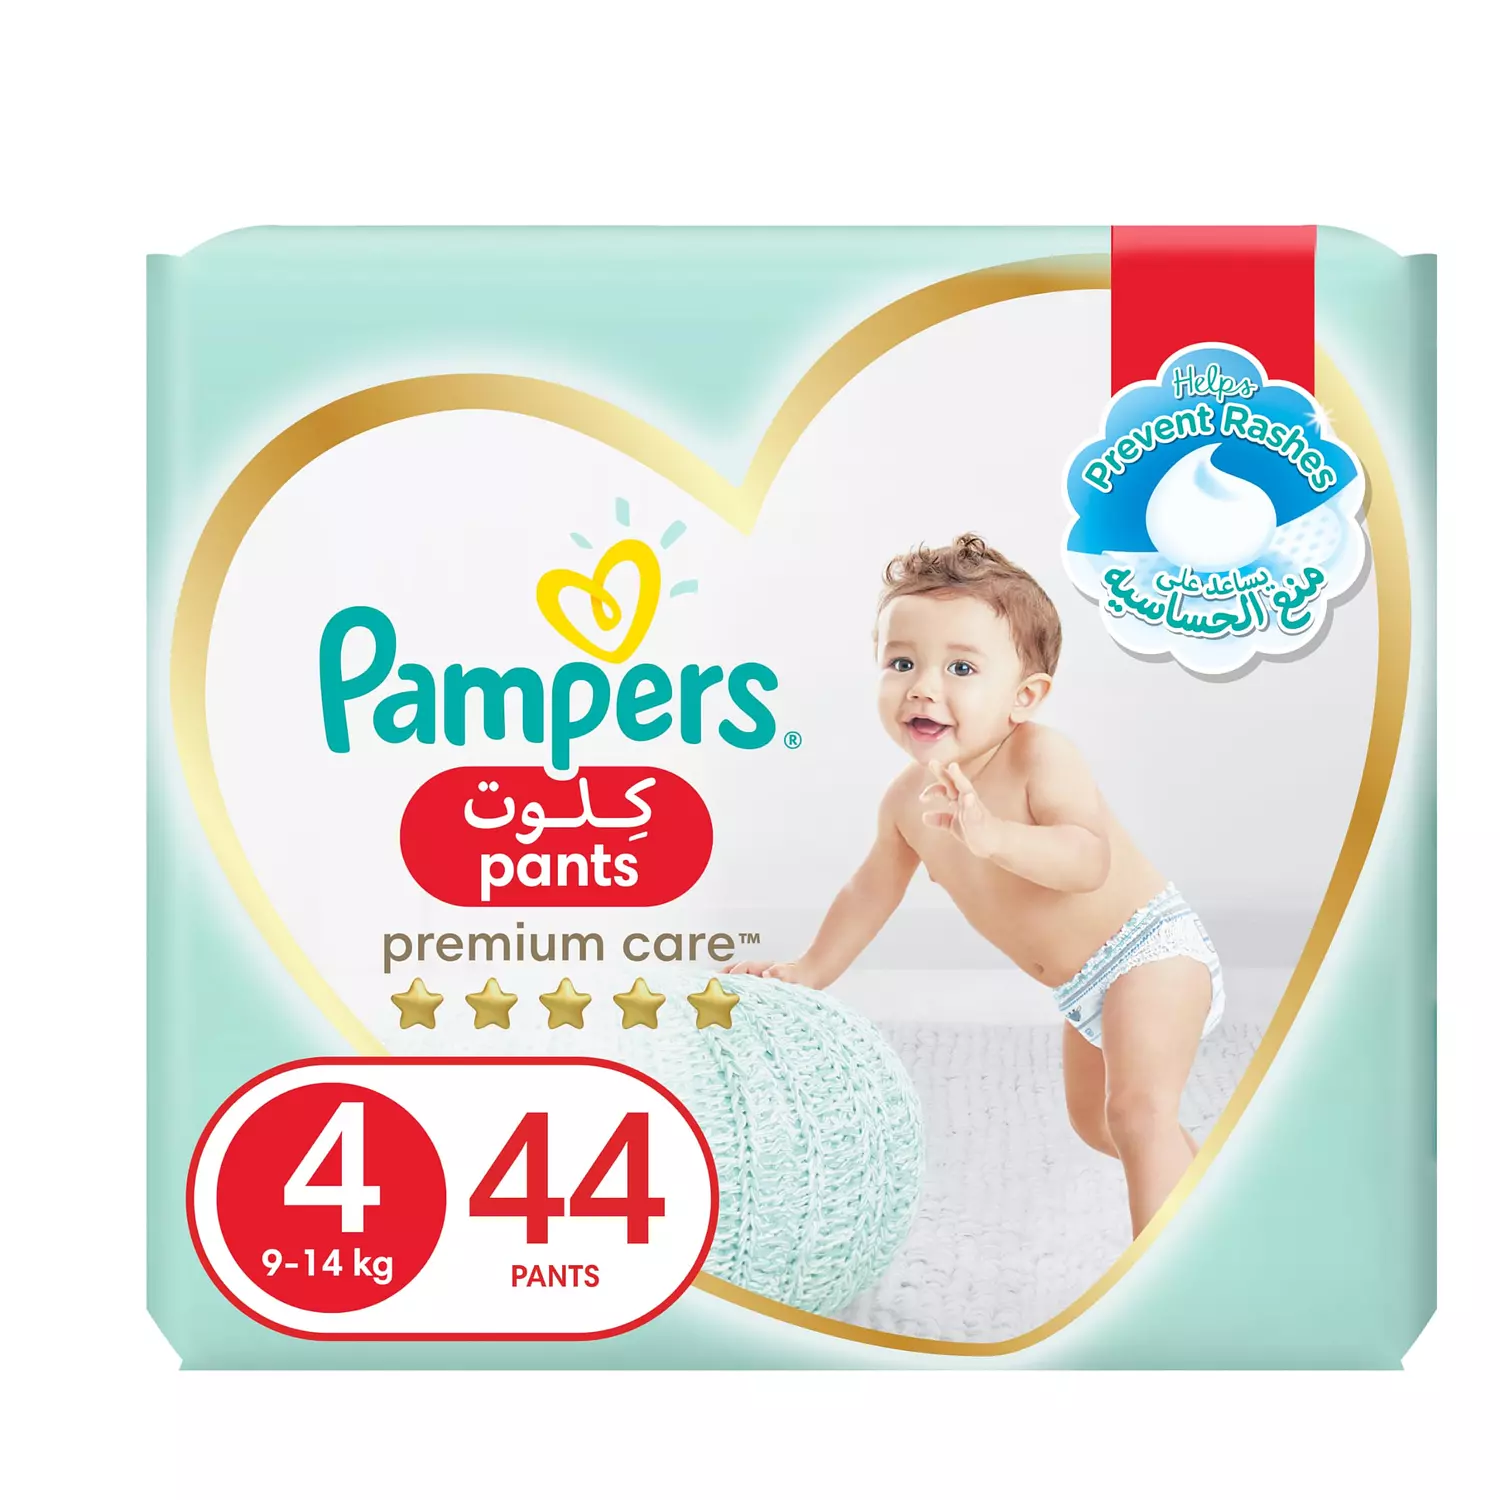 Pampers Premium Care Pants Diapers Size 5 12-18kg The Softest Diaper with Stretchy Sides for Better Fit 40 Baby Diapers hover image